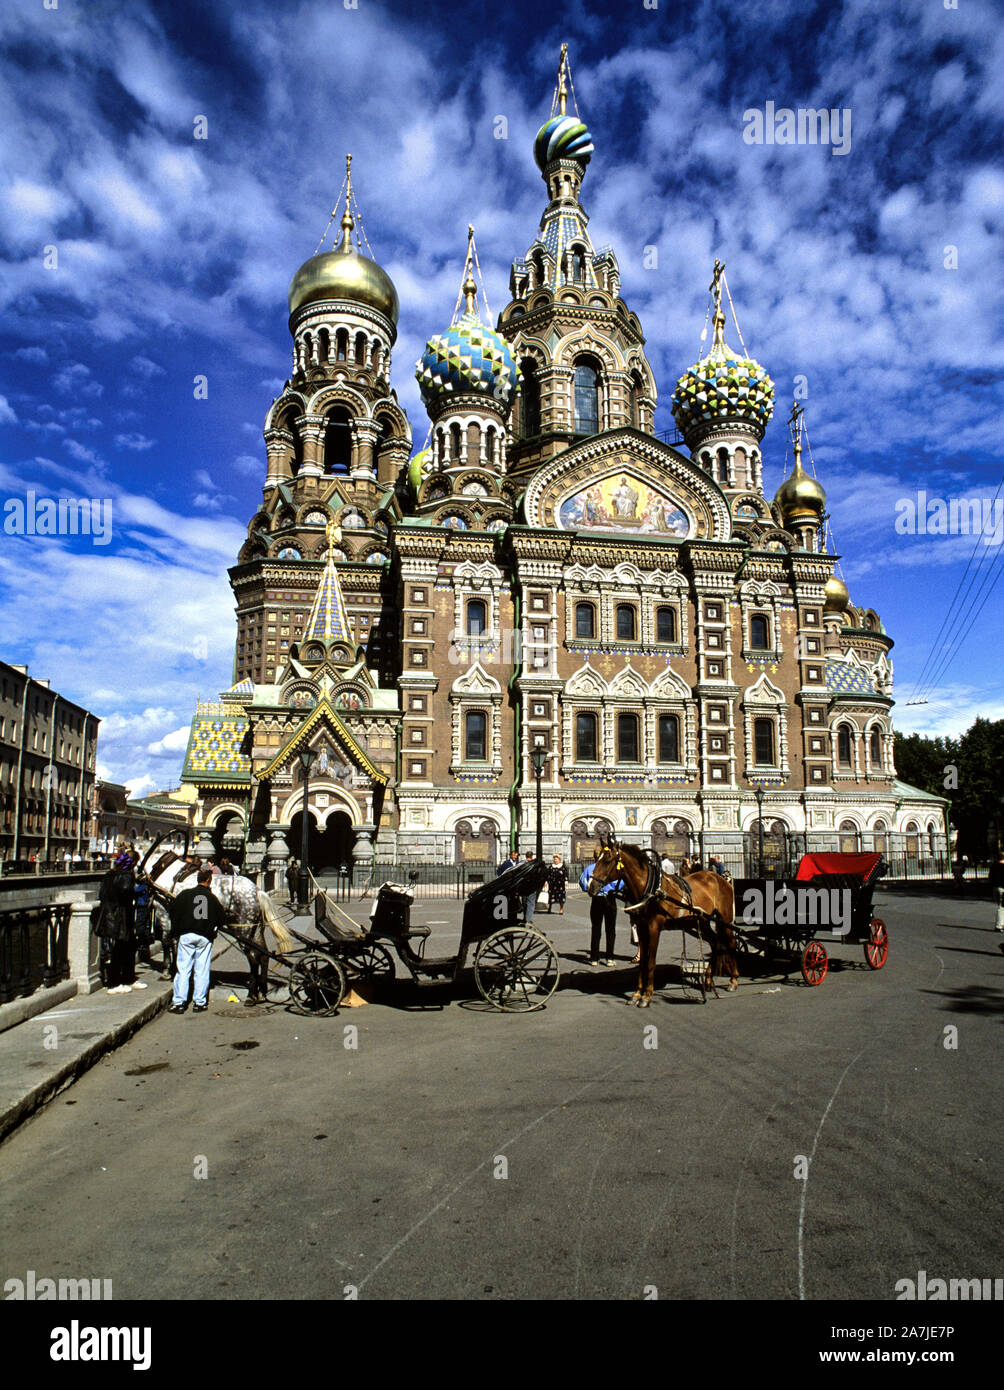 St. Petersburg Russia. St. Petersburg Russia. Church of the savior on the spilled blood Stock Photo